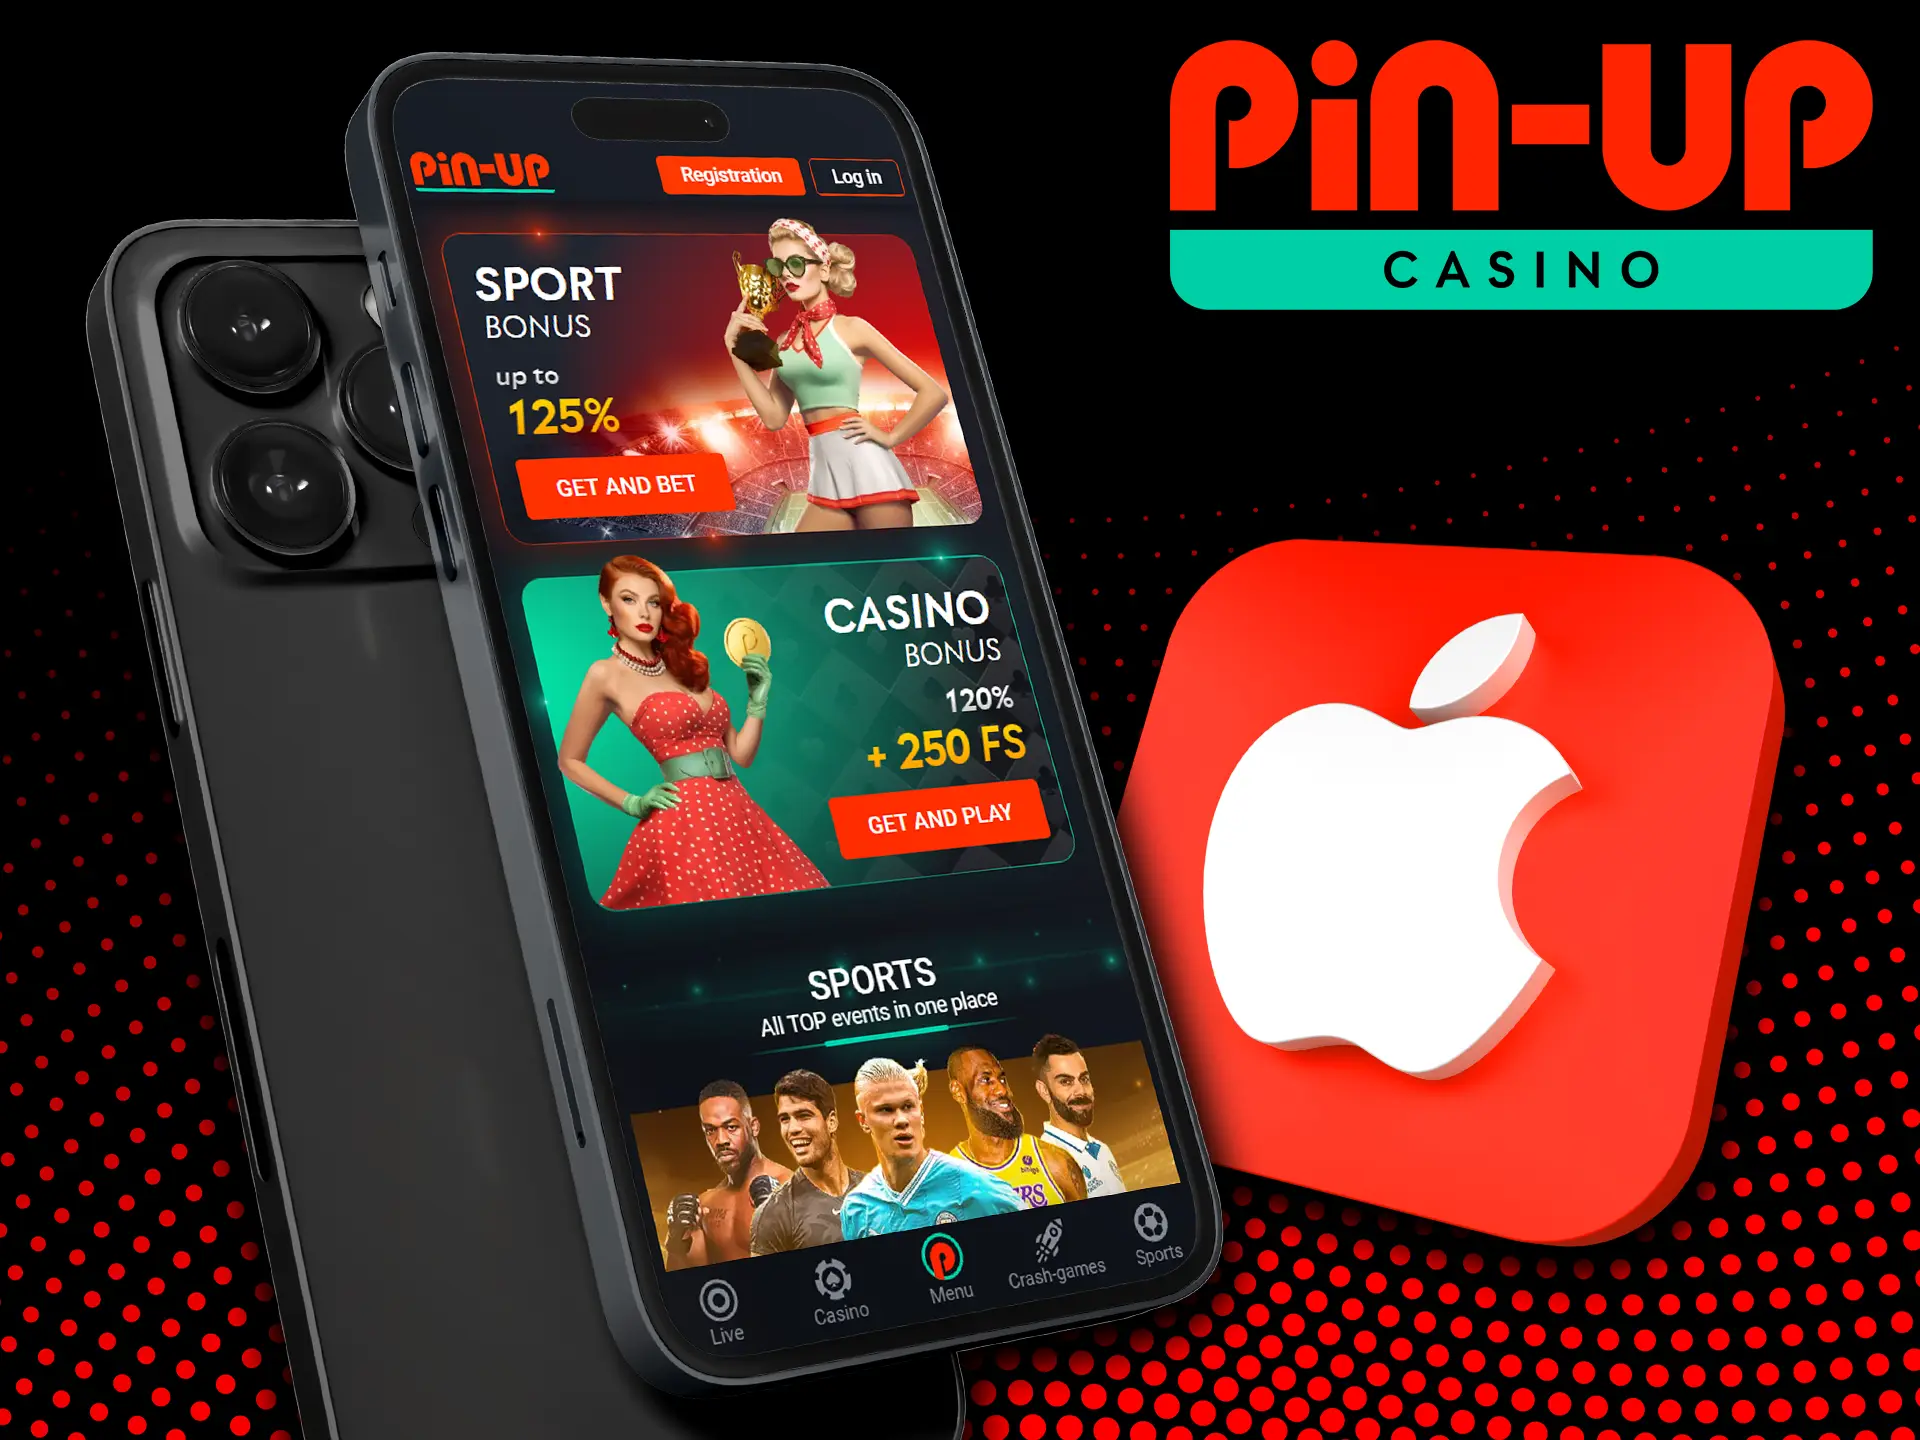 The Pin-Up Casino team developed the app for iOS as well.